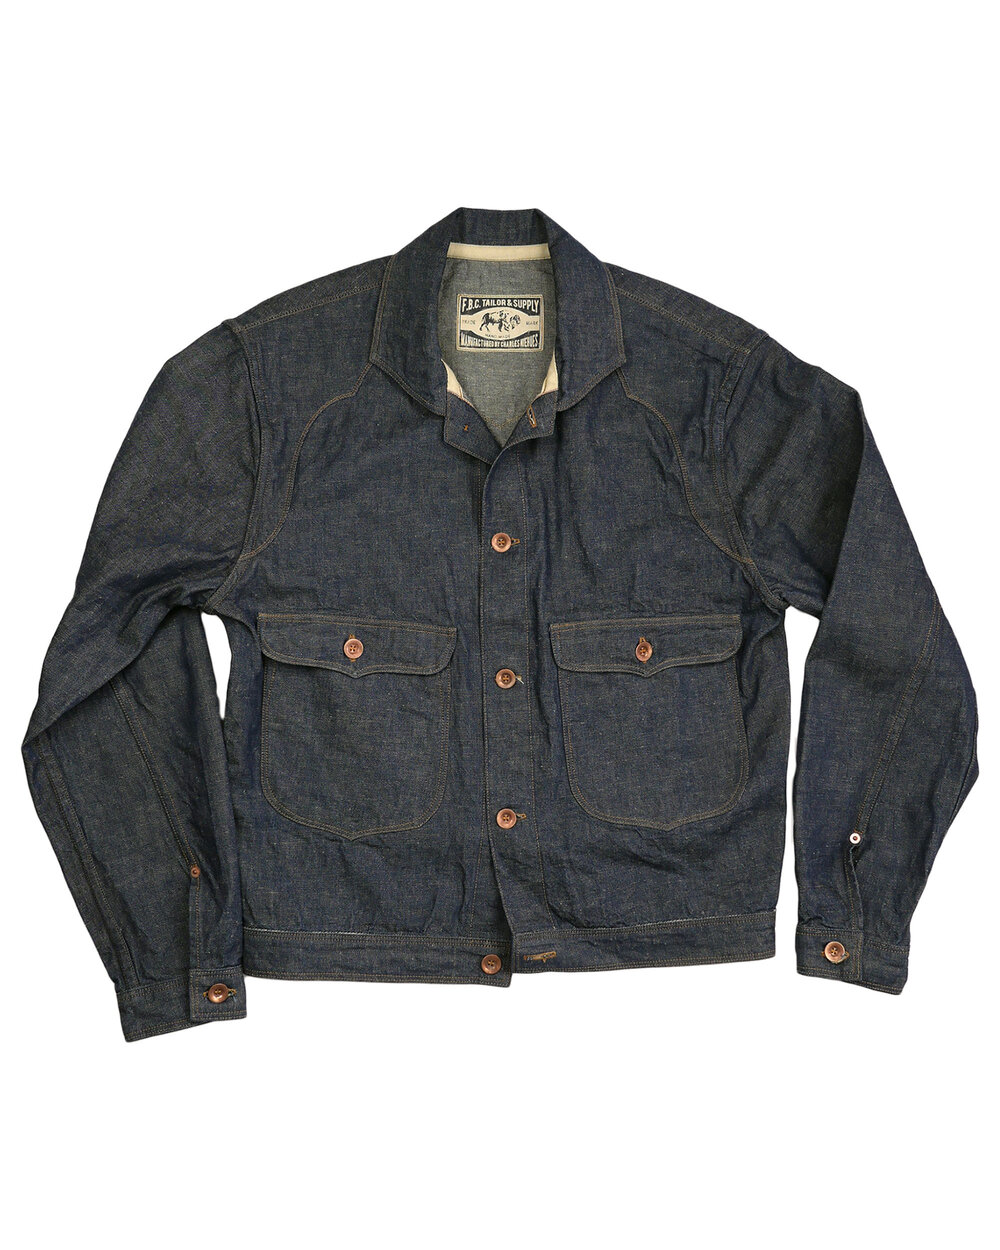 Garment Dyed Work Jacket in Recycled Denim  Recycled denim, Garment dye,  Work jackets